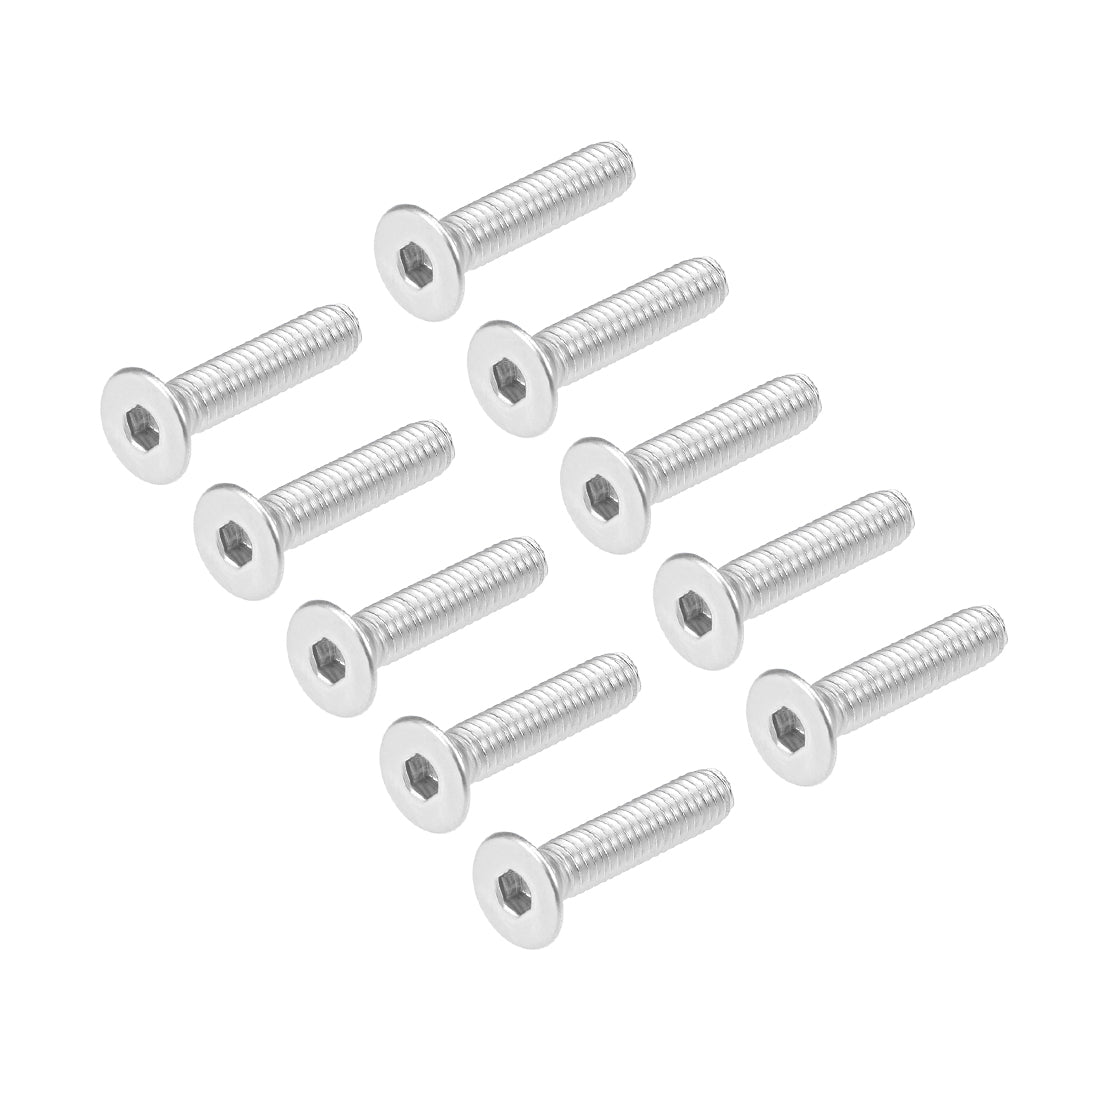 uxcell Uxcell Flat Head Machine Screws Hex Screw Stainless Steel Fasteners Bolts 50pcs